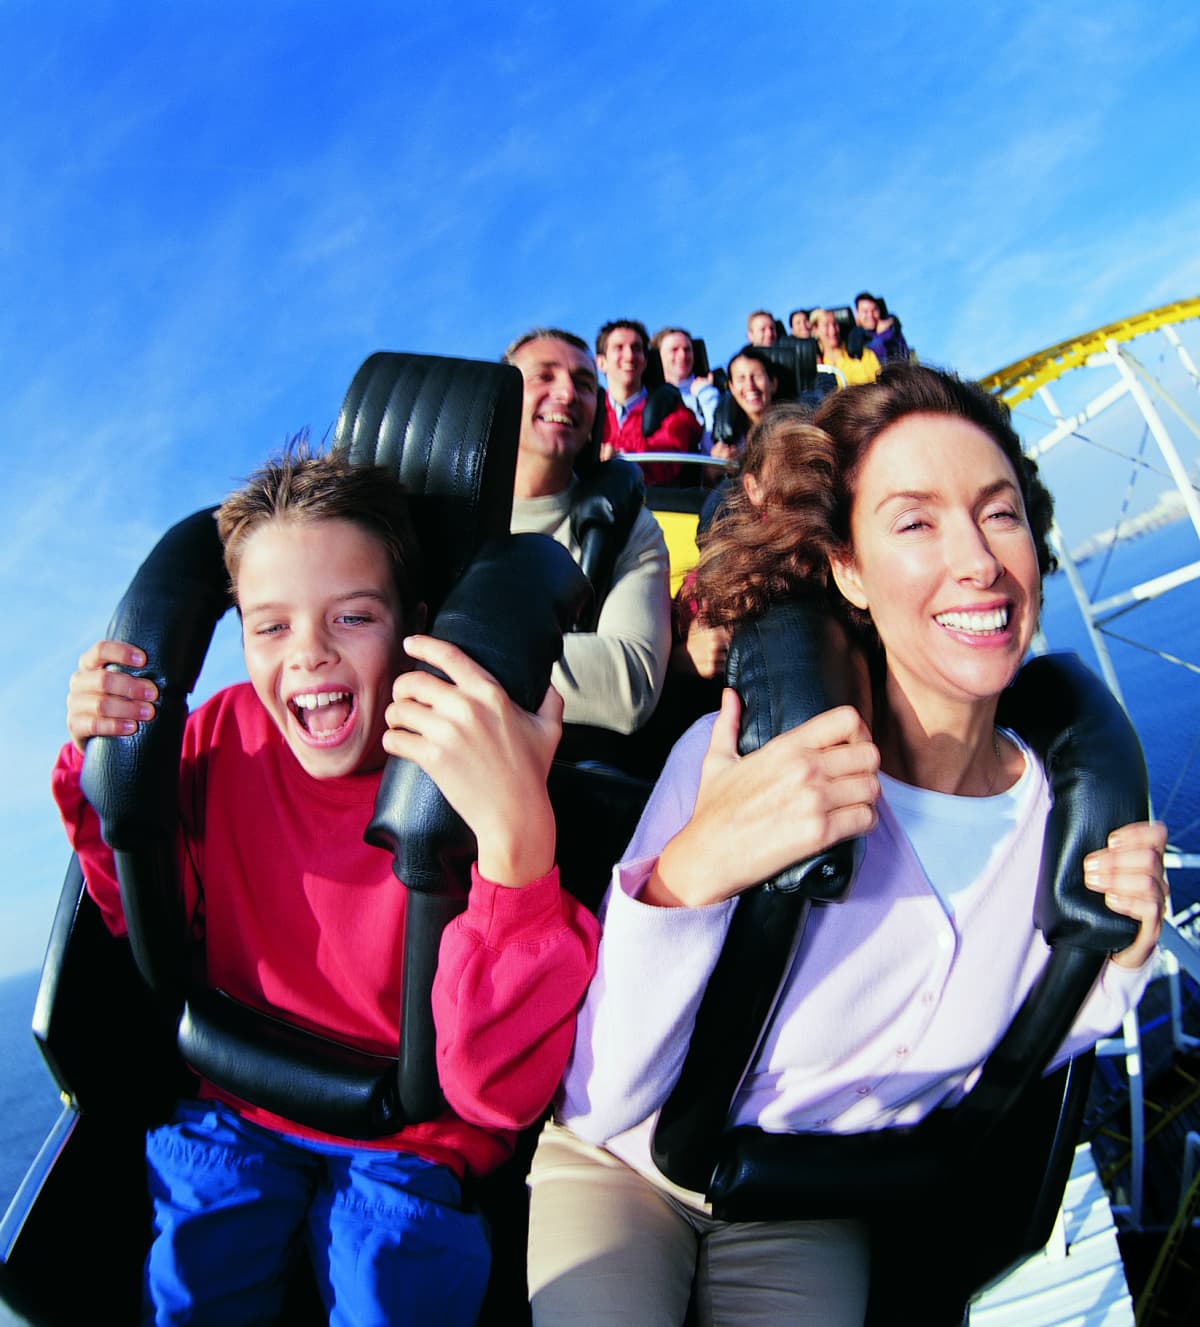 People enjoying the excitement of being on a roller coaster